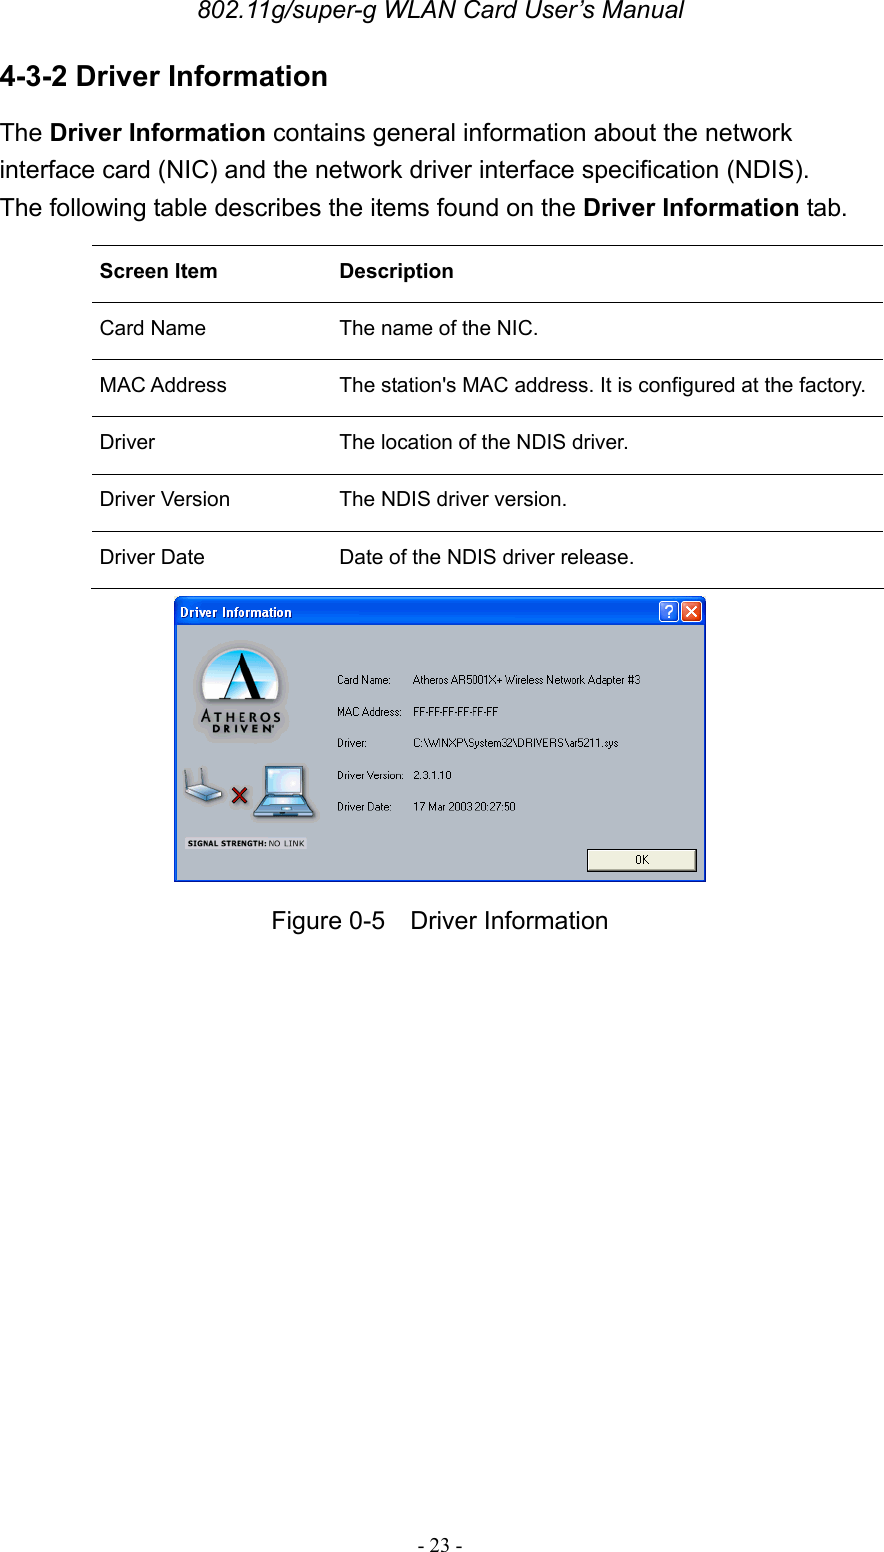 802.11g/super-g WLAN Card User’s Manual - 23 - 4-3-2 Driver Information The Driver Information contains general information about the network interface card (NIC) and the network driver interface specification (NDIS). The following table describes the items found on the Driver Information tab. Screen Item  Description Card Name The name of the NIC. MAC Address The station&apos;s MAC address. It is configured at the factory.Driver The location of the NDIS driver. Driver Version The NDIS driver version. Driver Date Date of the NDIS driver release.  Figure 0-5  Driver Information  